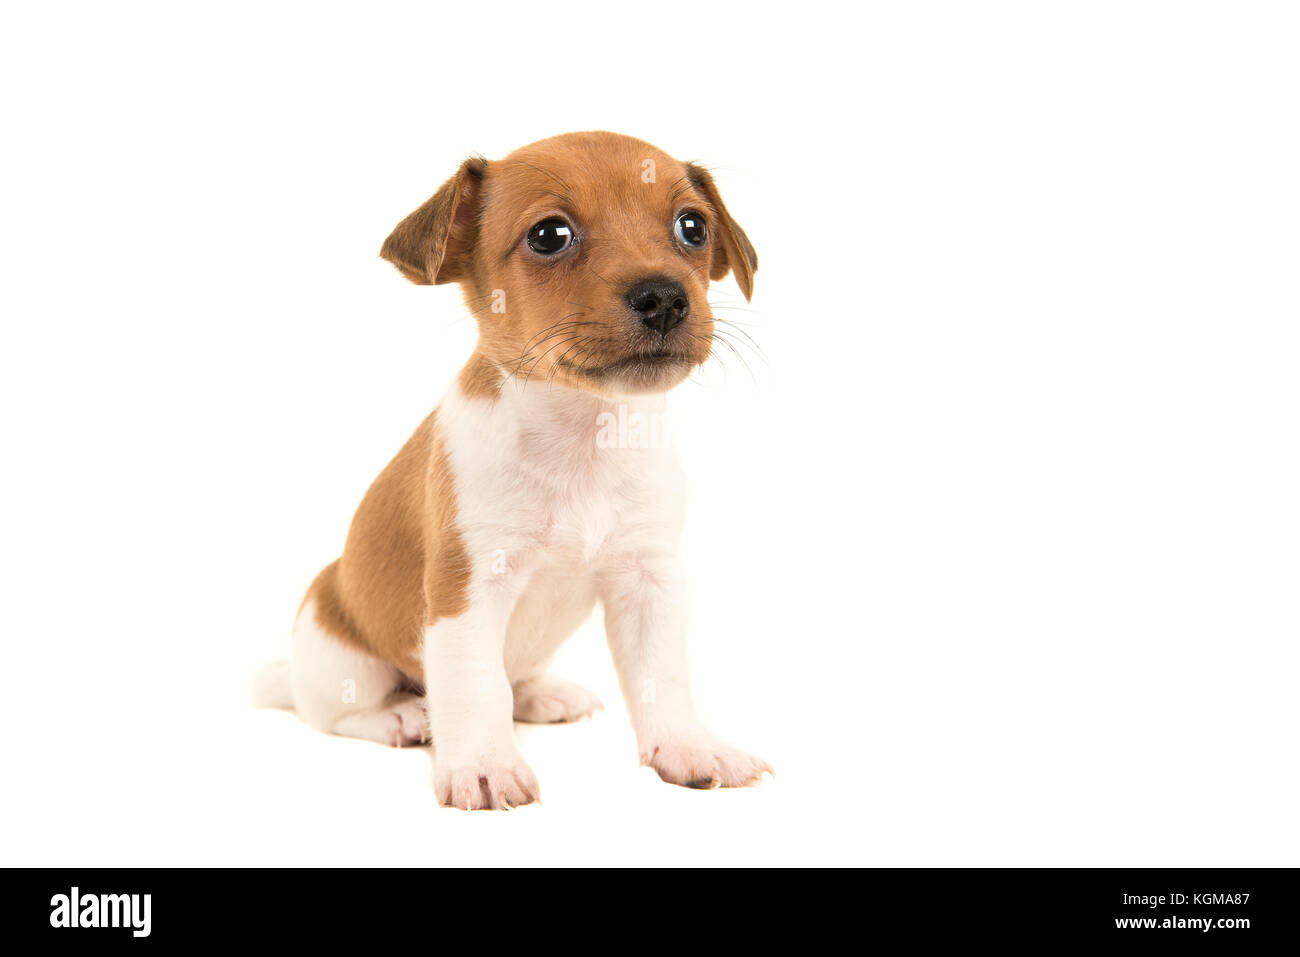 https://c8.alamy.com/comp/KGMA87/cute-brown-and-white-jack-russel-terrier-puppy-sitting-isolated-on-KGMA87.jpg